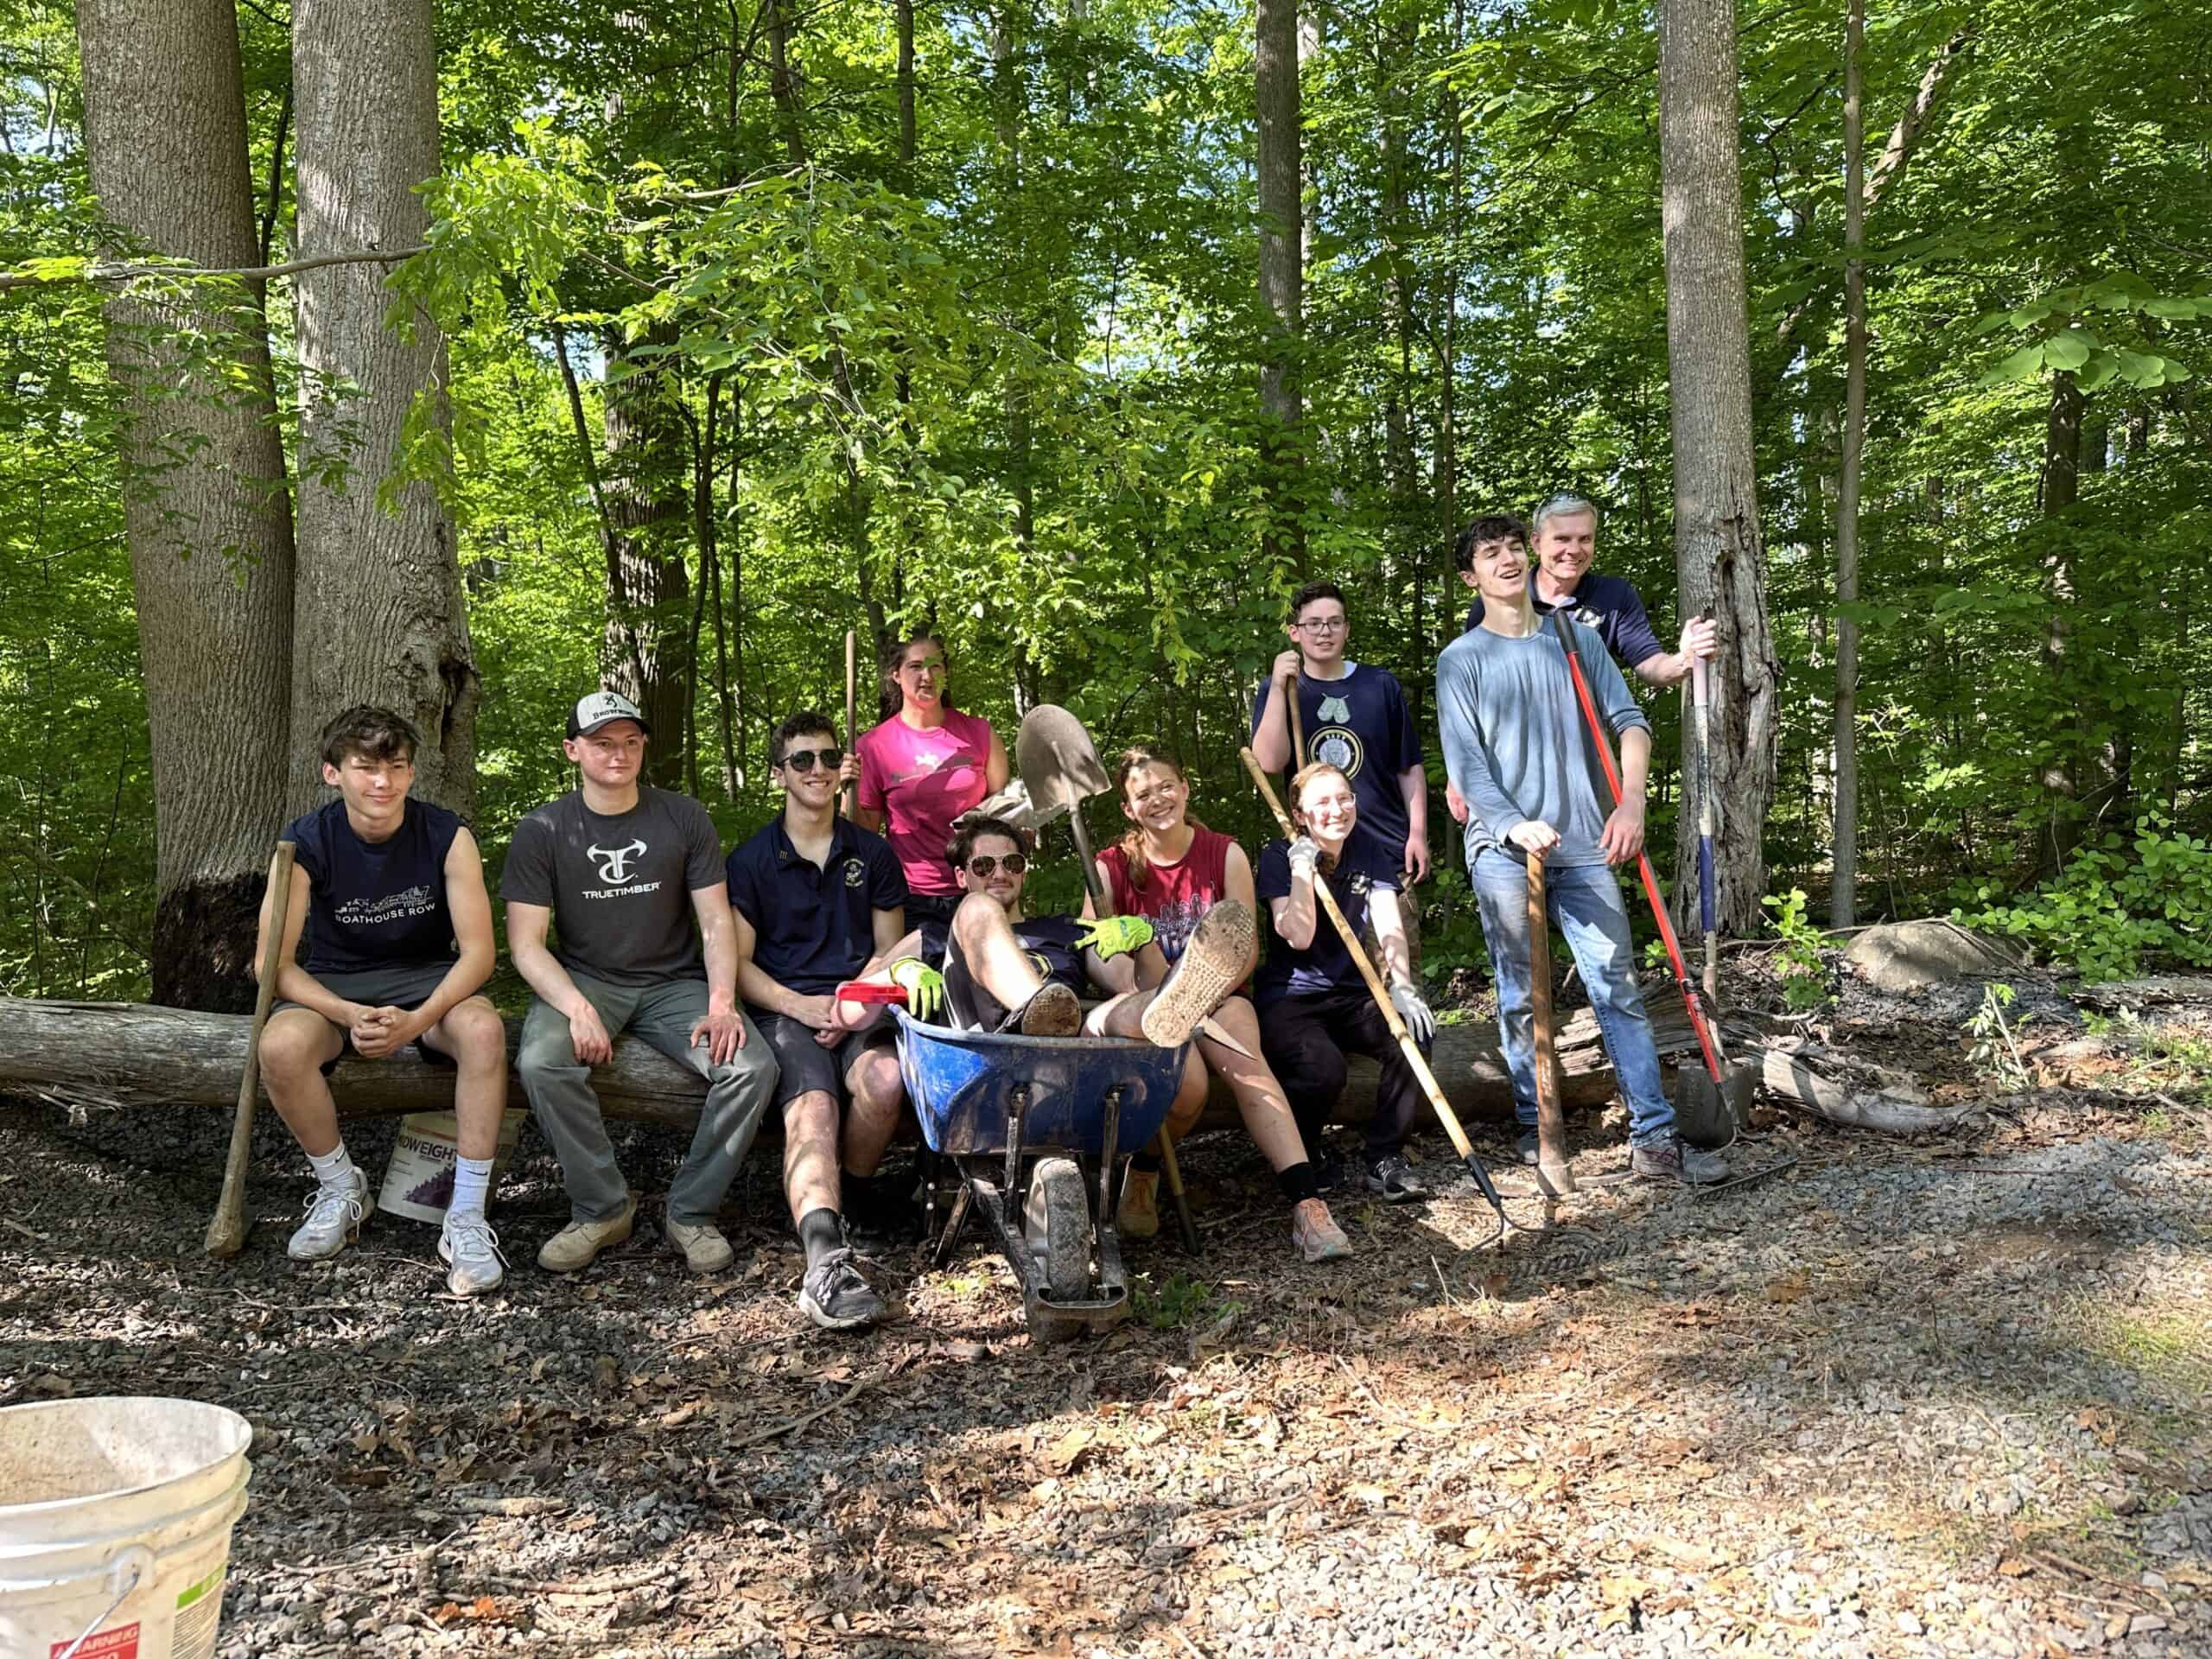 High school students pose with tools after they completed a project in the woods